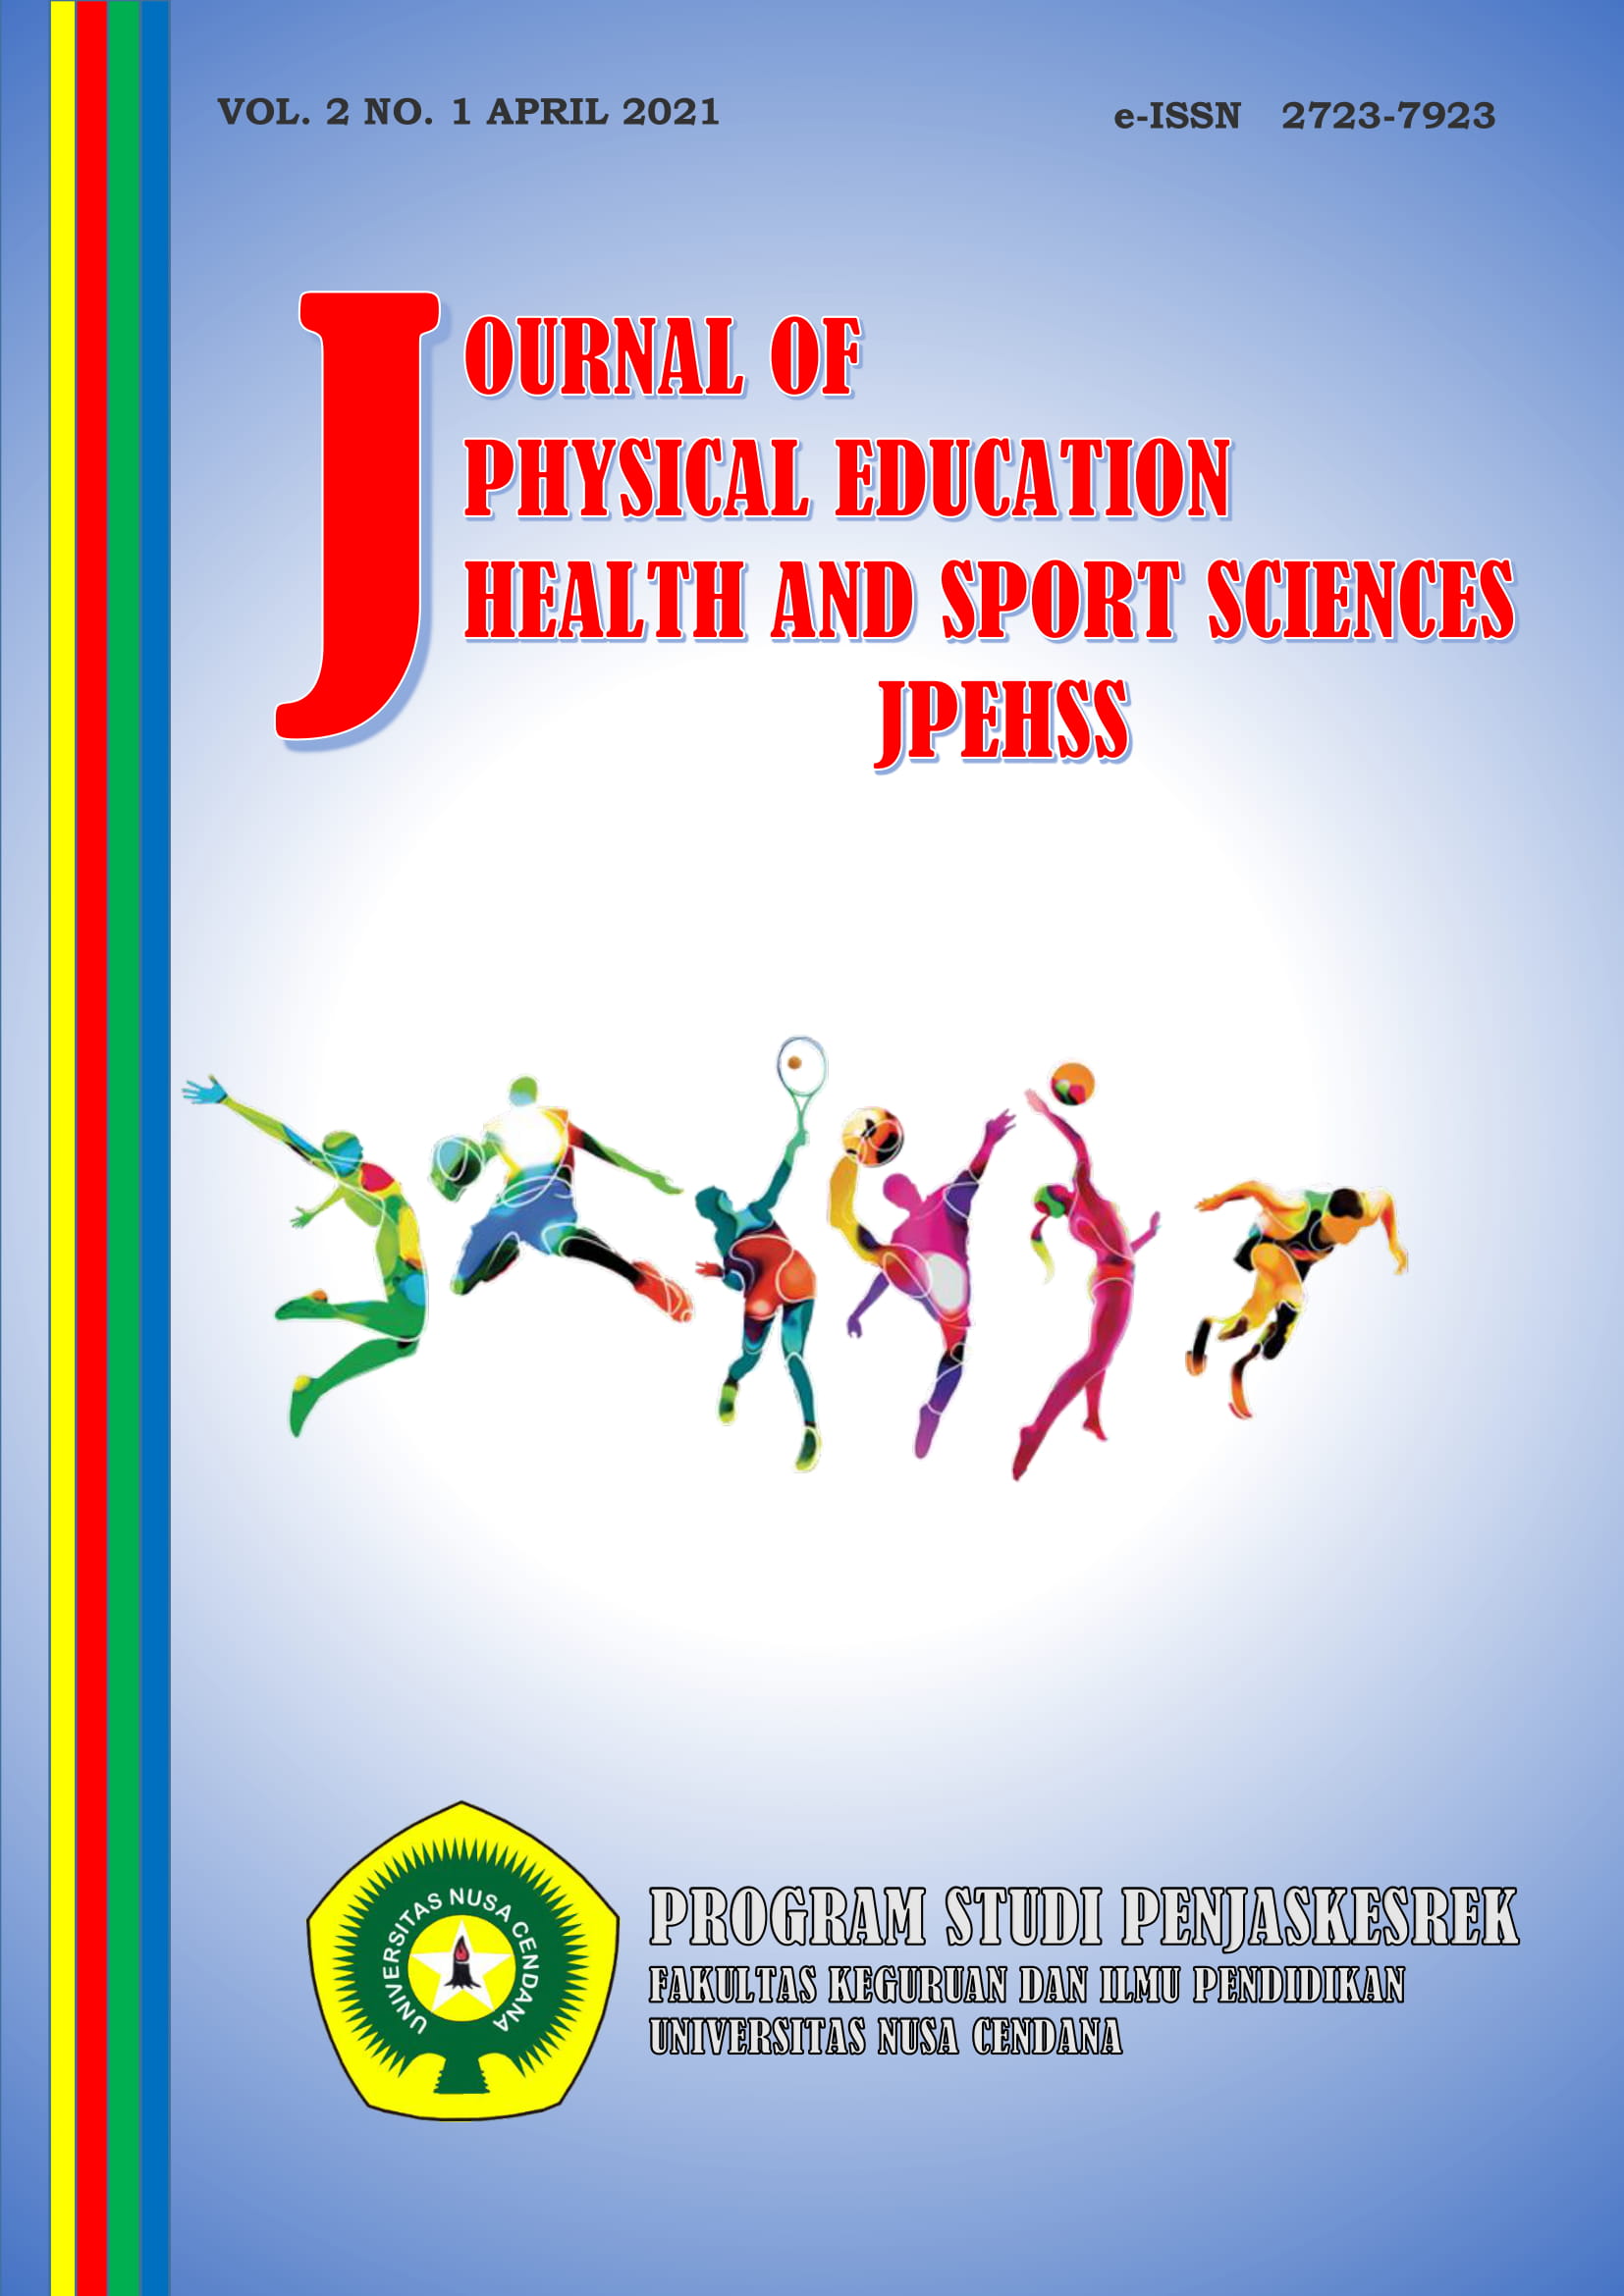 news article on physical education